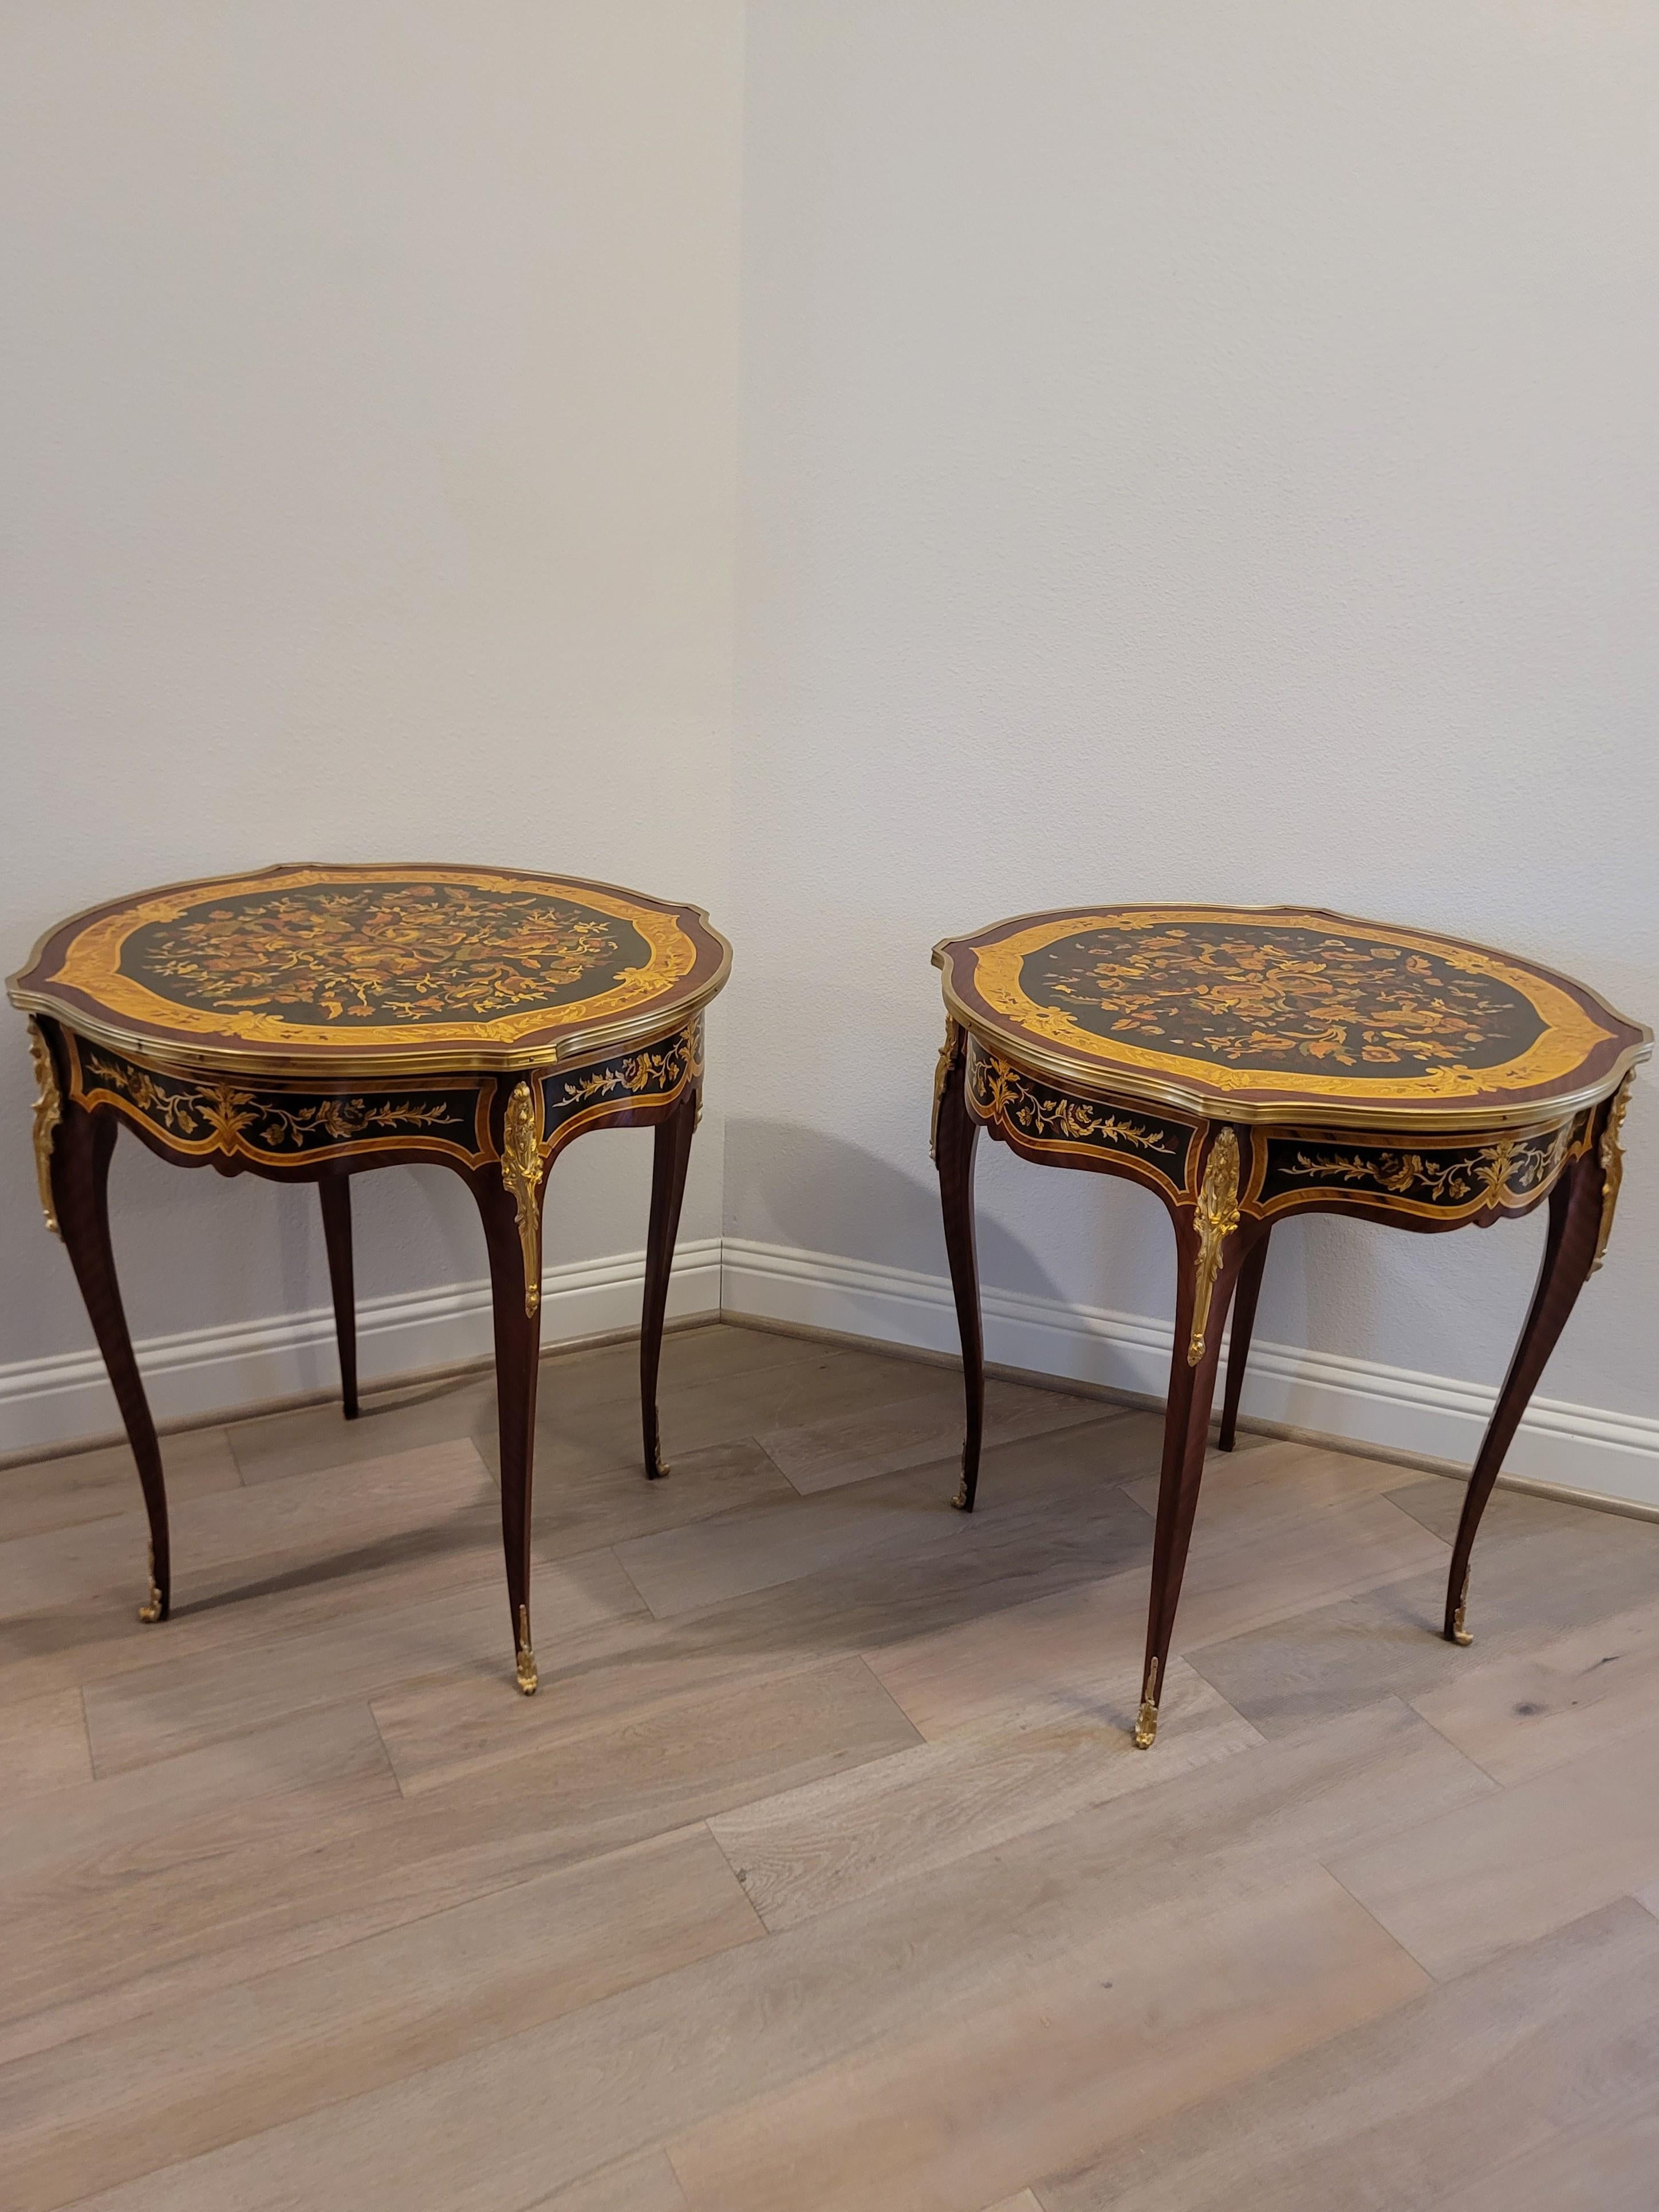 A fine pair of French Louis XV style gilt bronze mounted marquetry inlaid mahogany side tables.

Exquisitely hand-crafted in France, 20th century, fine quality, exceptionally executed in luxurious Louis XV style with Napoleon III Second Empire